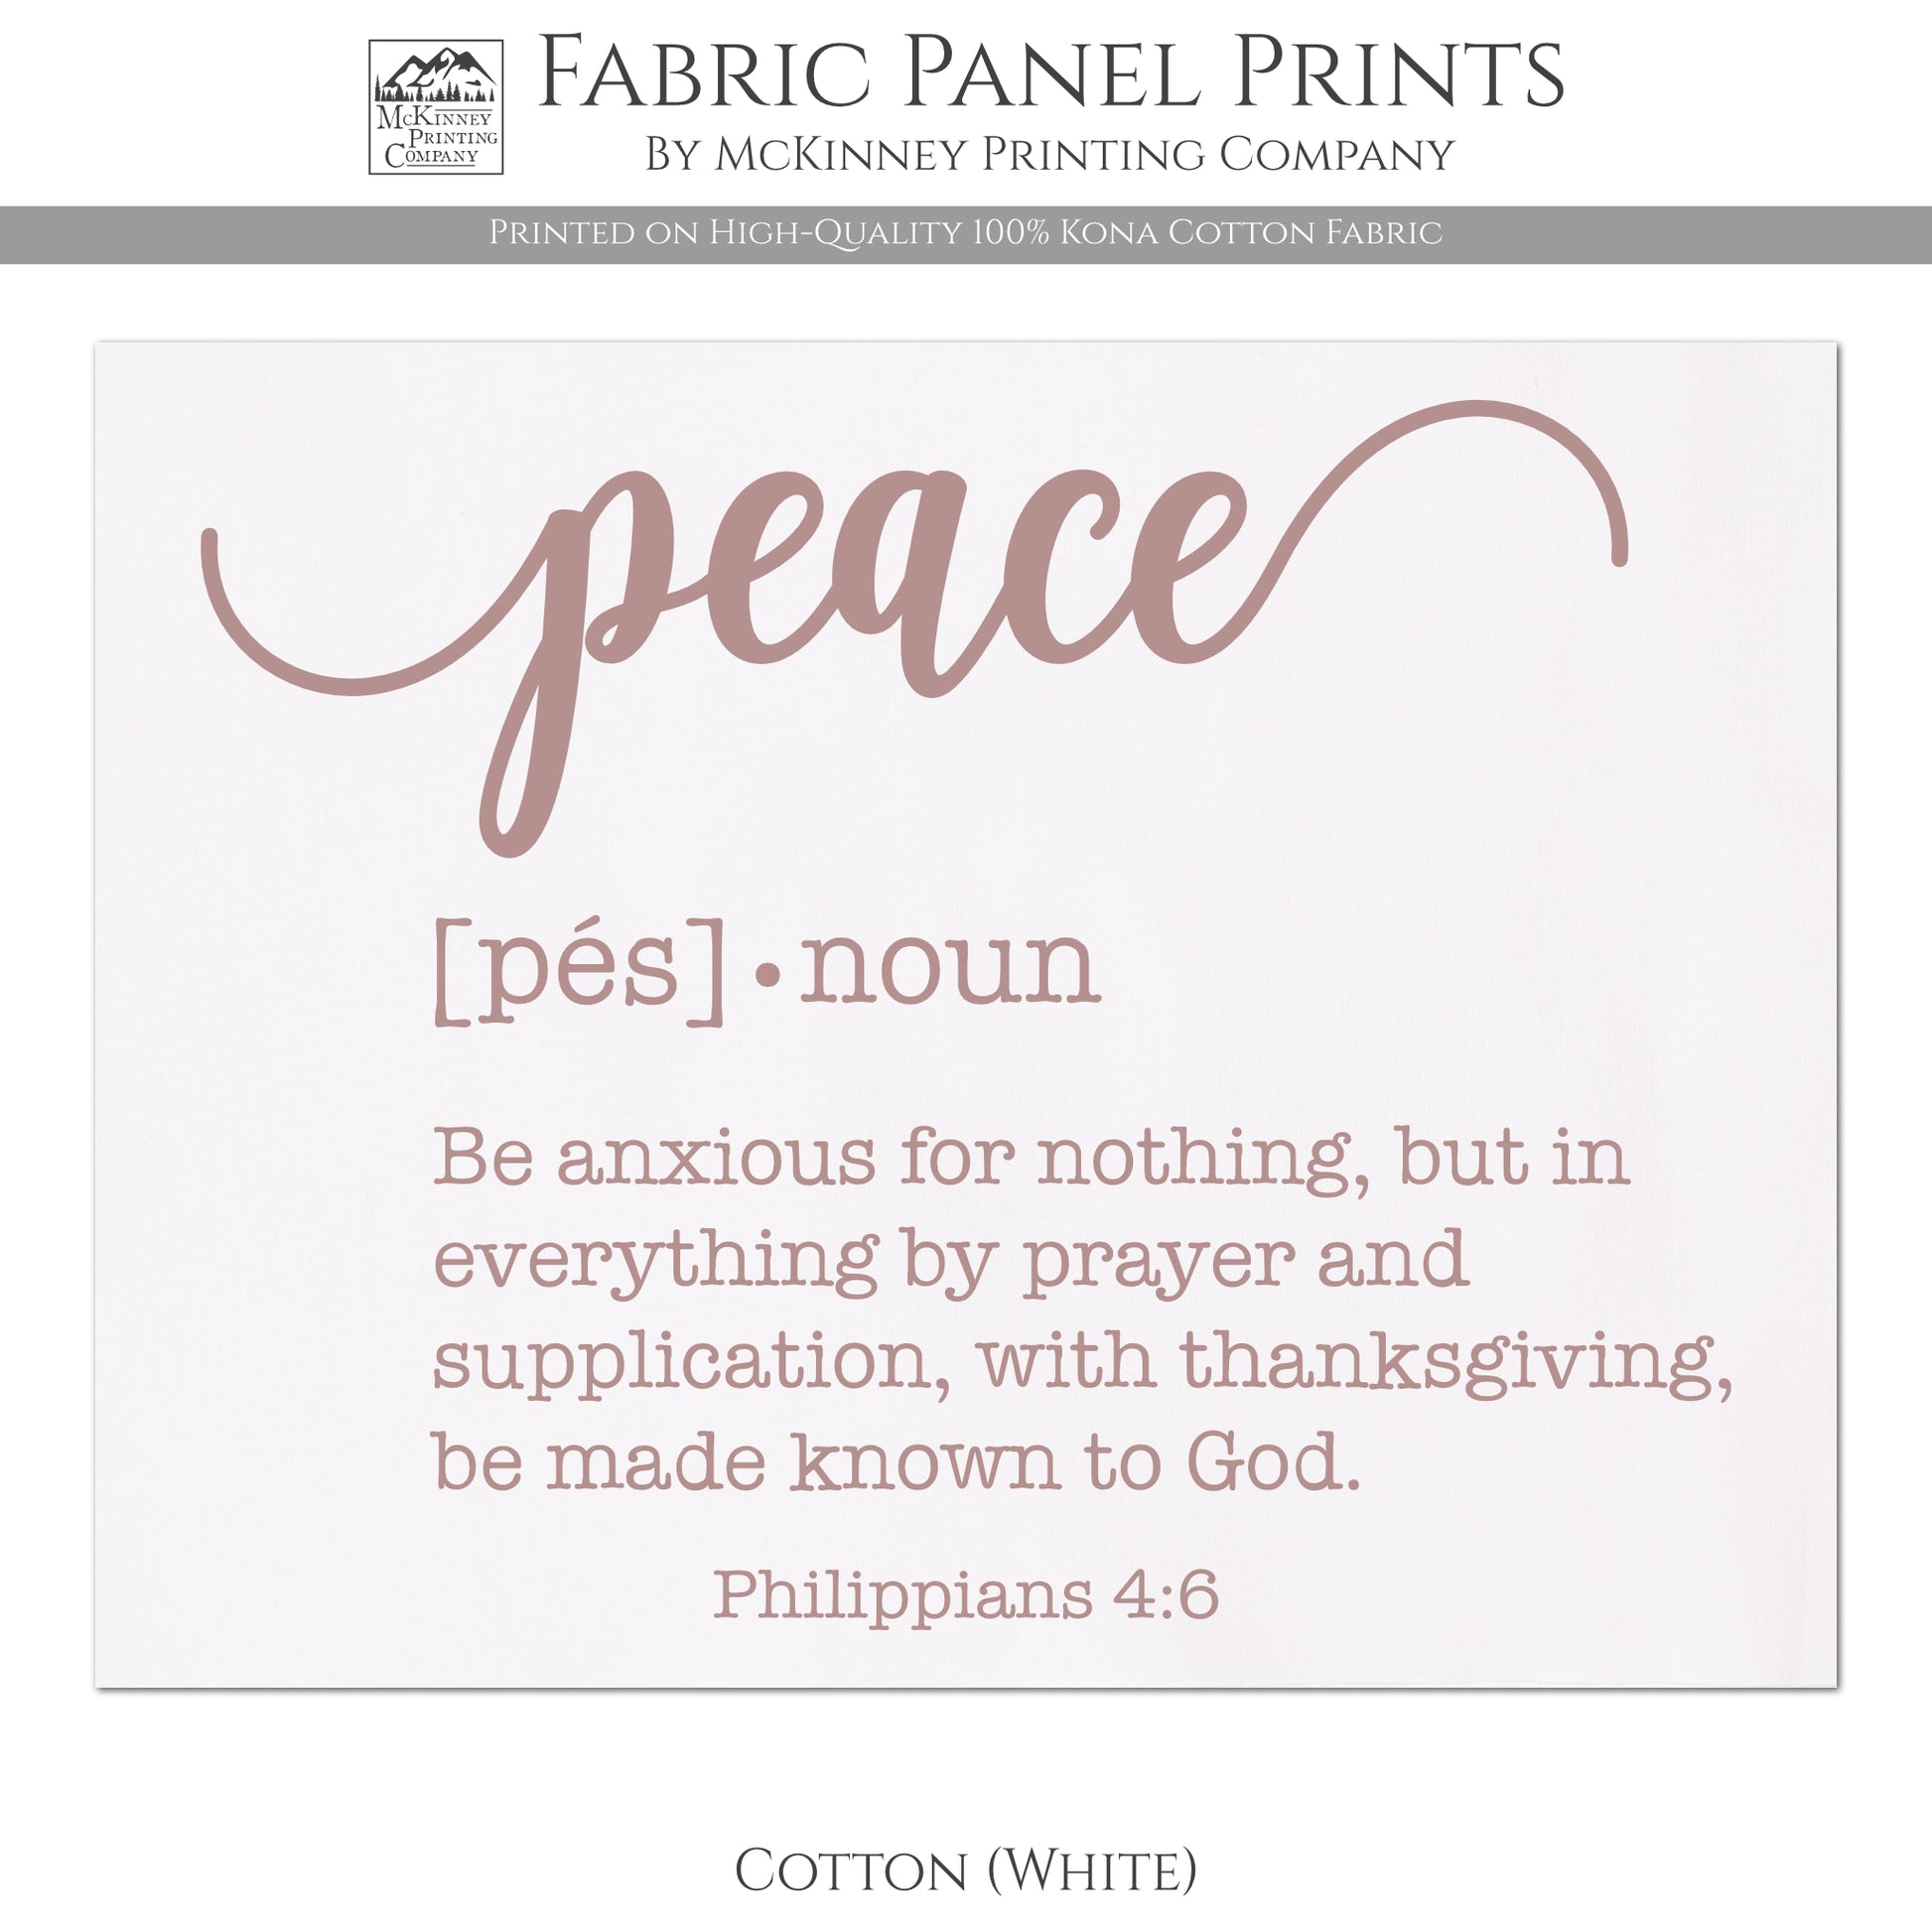 Peace Fabric - Be anxious for nothing, but in everything by prayer and supplication, with thanksgiving, be made known to God. - Philippians 4:6 - Cotton, White